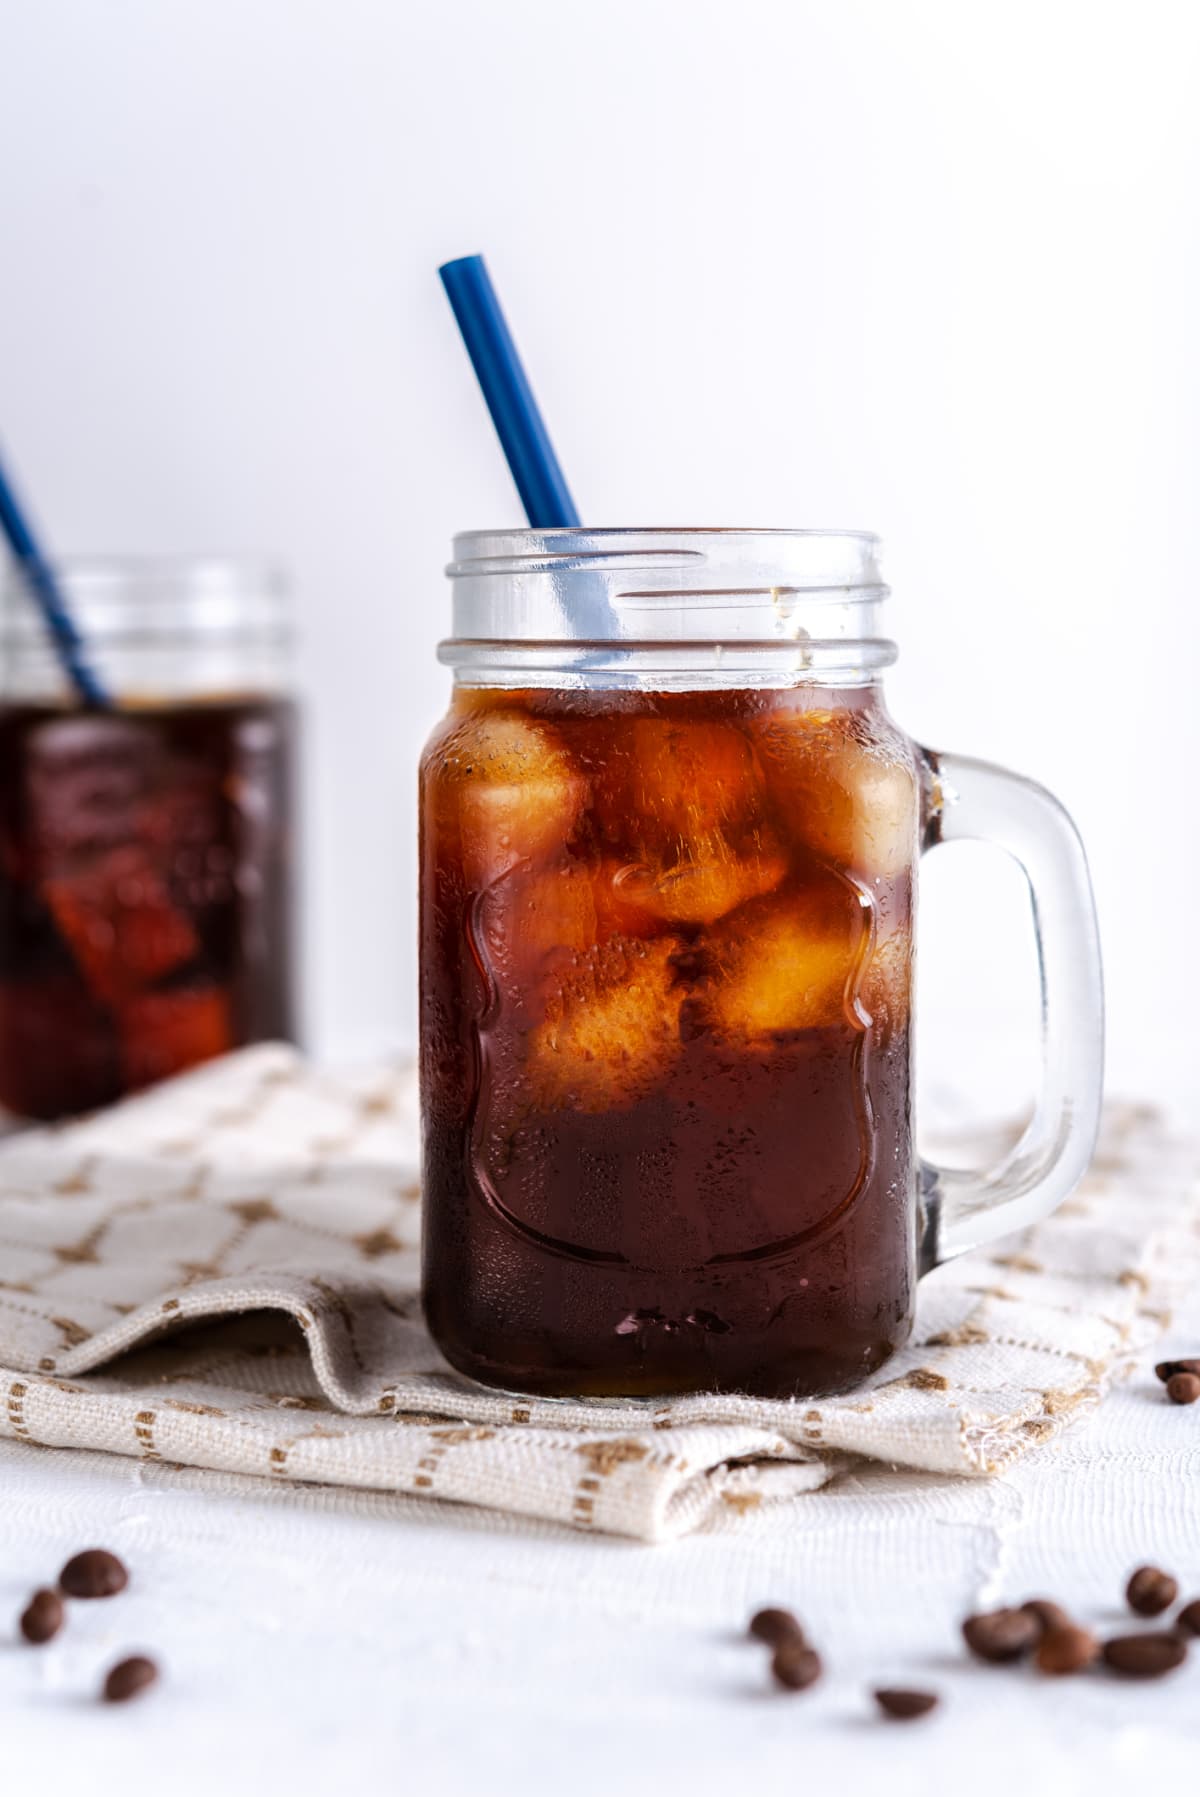 Cold Brew coffee in a glass jar with handle and straw